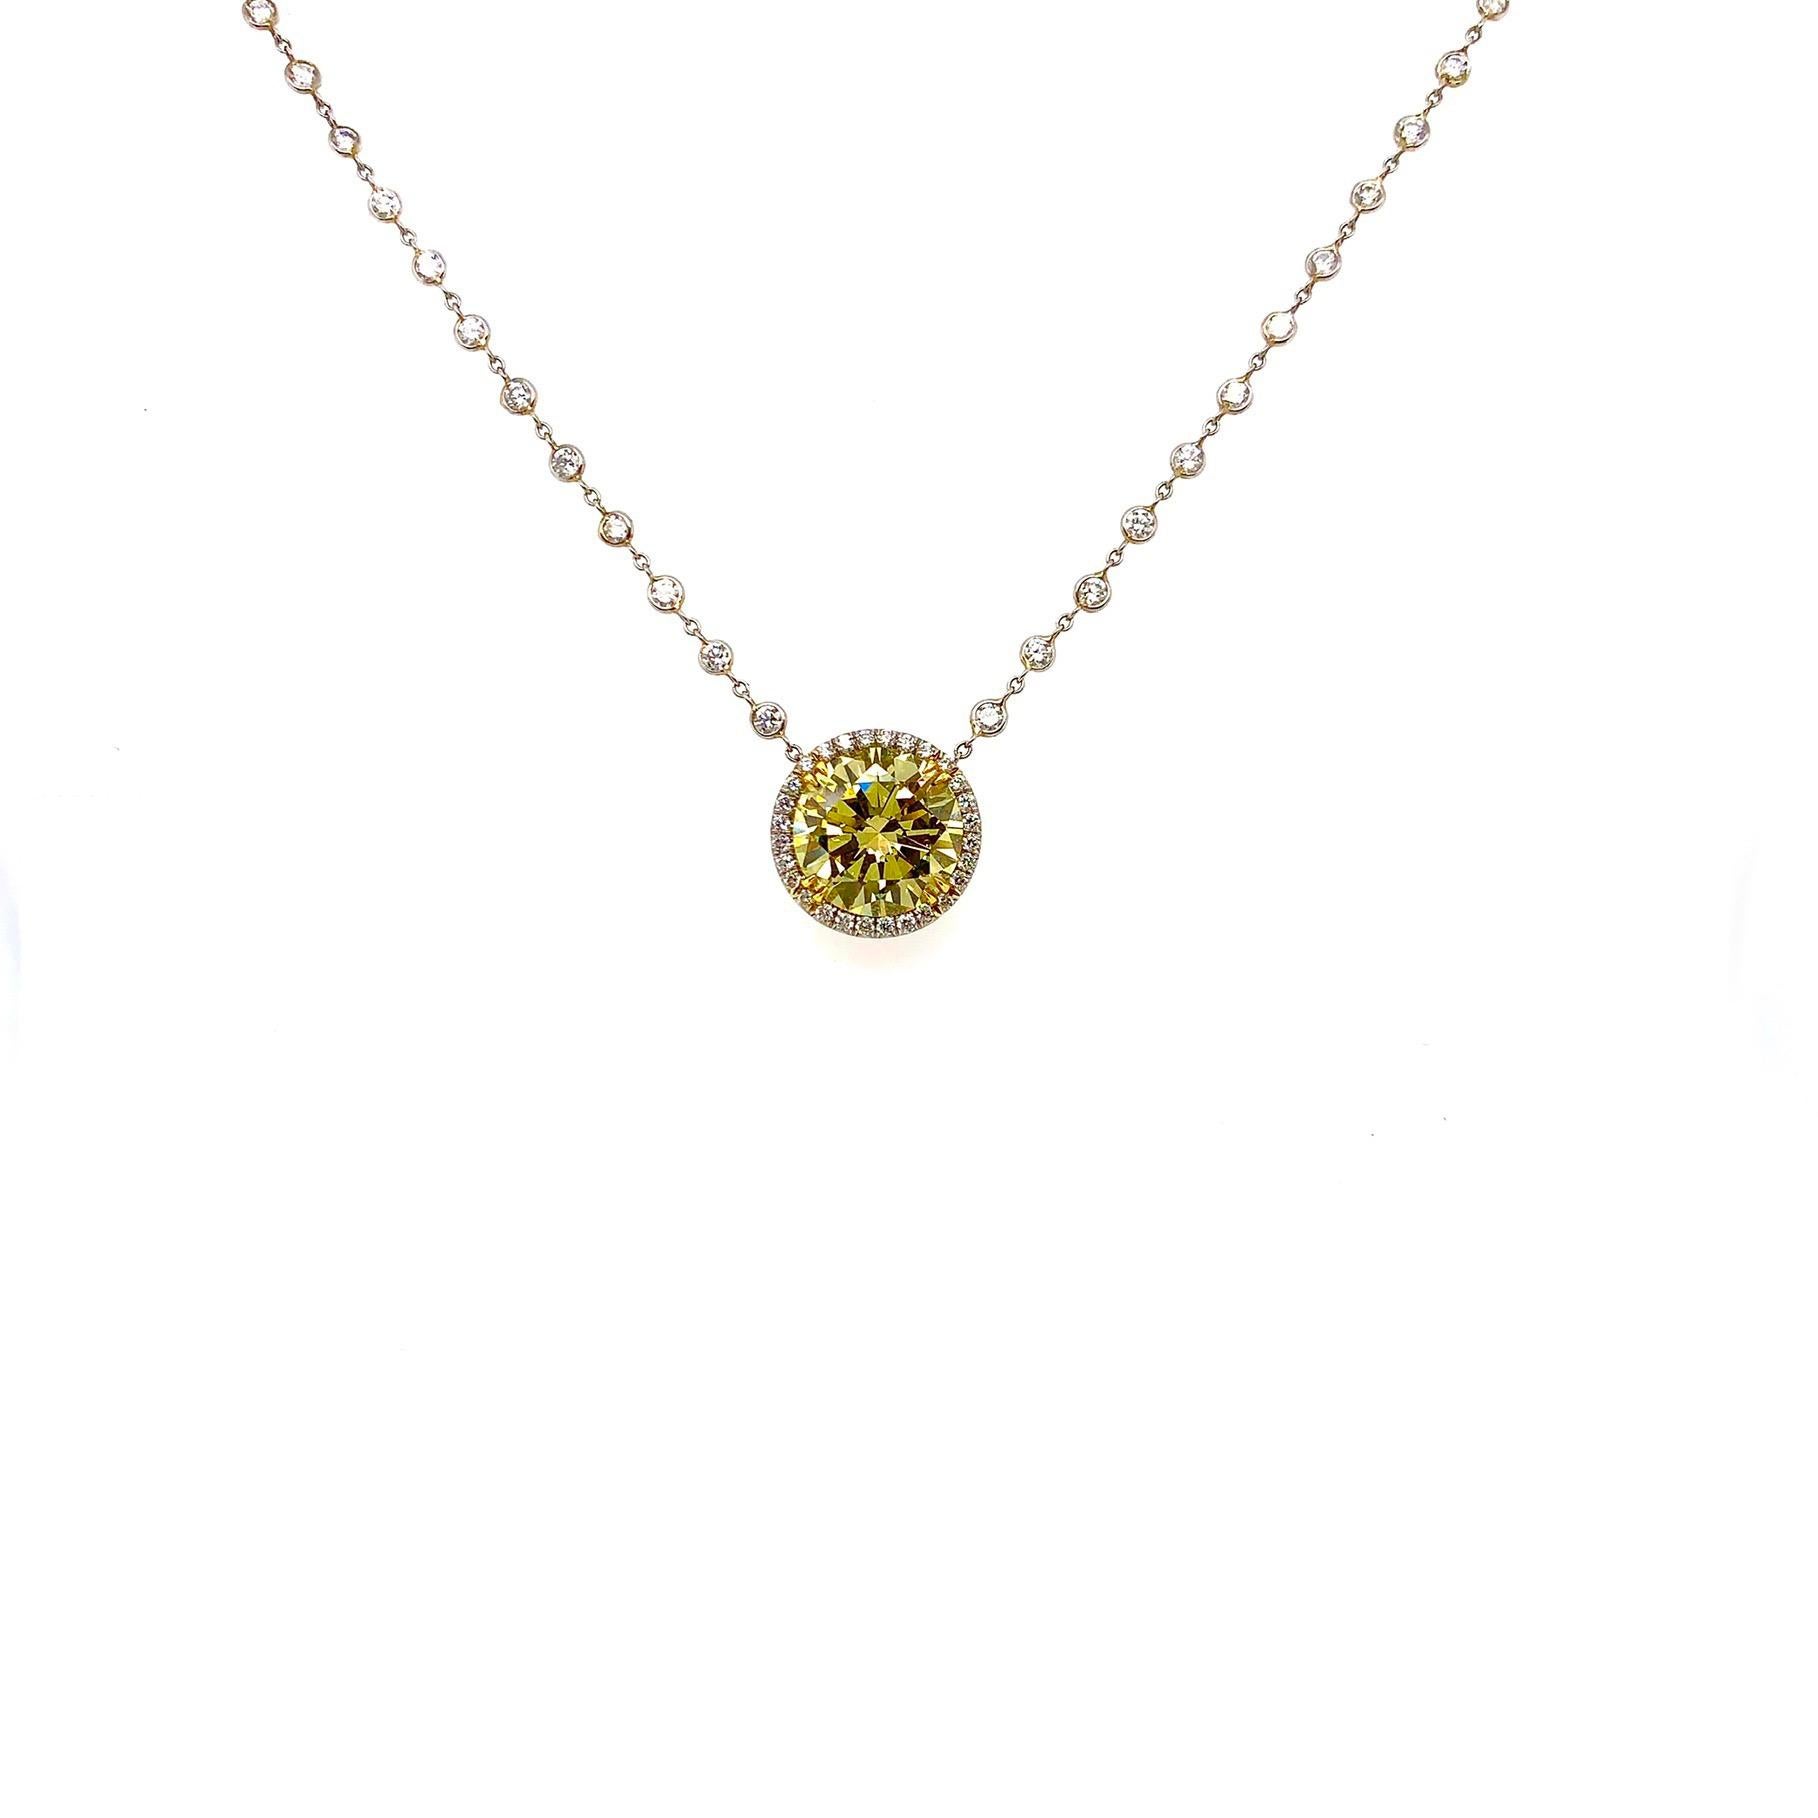 Massive looking pendant. Featuring a fancy yellow round brilliant cut Diamond with a 3.82 total carat weight.
Graded by the GIA to be natural in color SI1 in clarity. This stone exhibits full saturation.
Suspended from a handmade platnium chain with